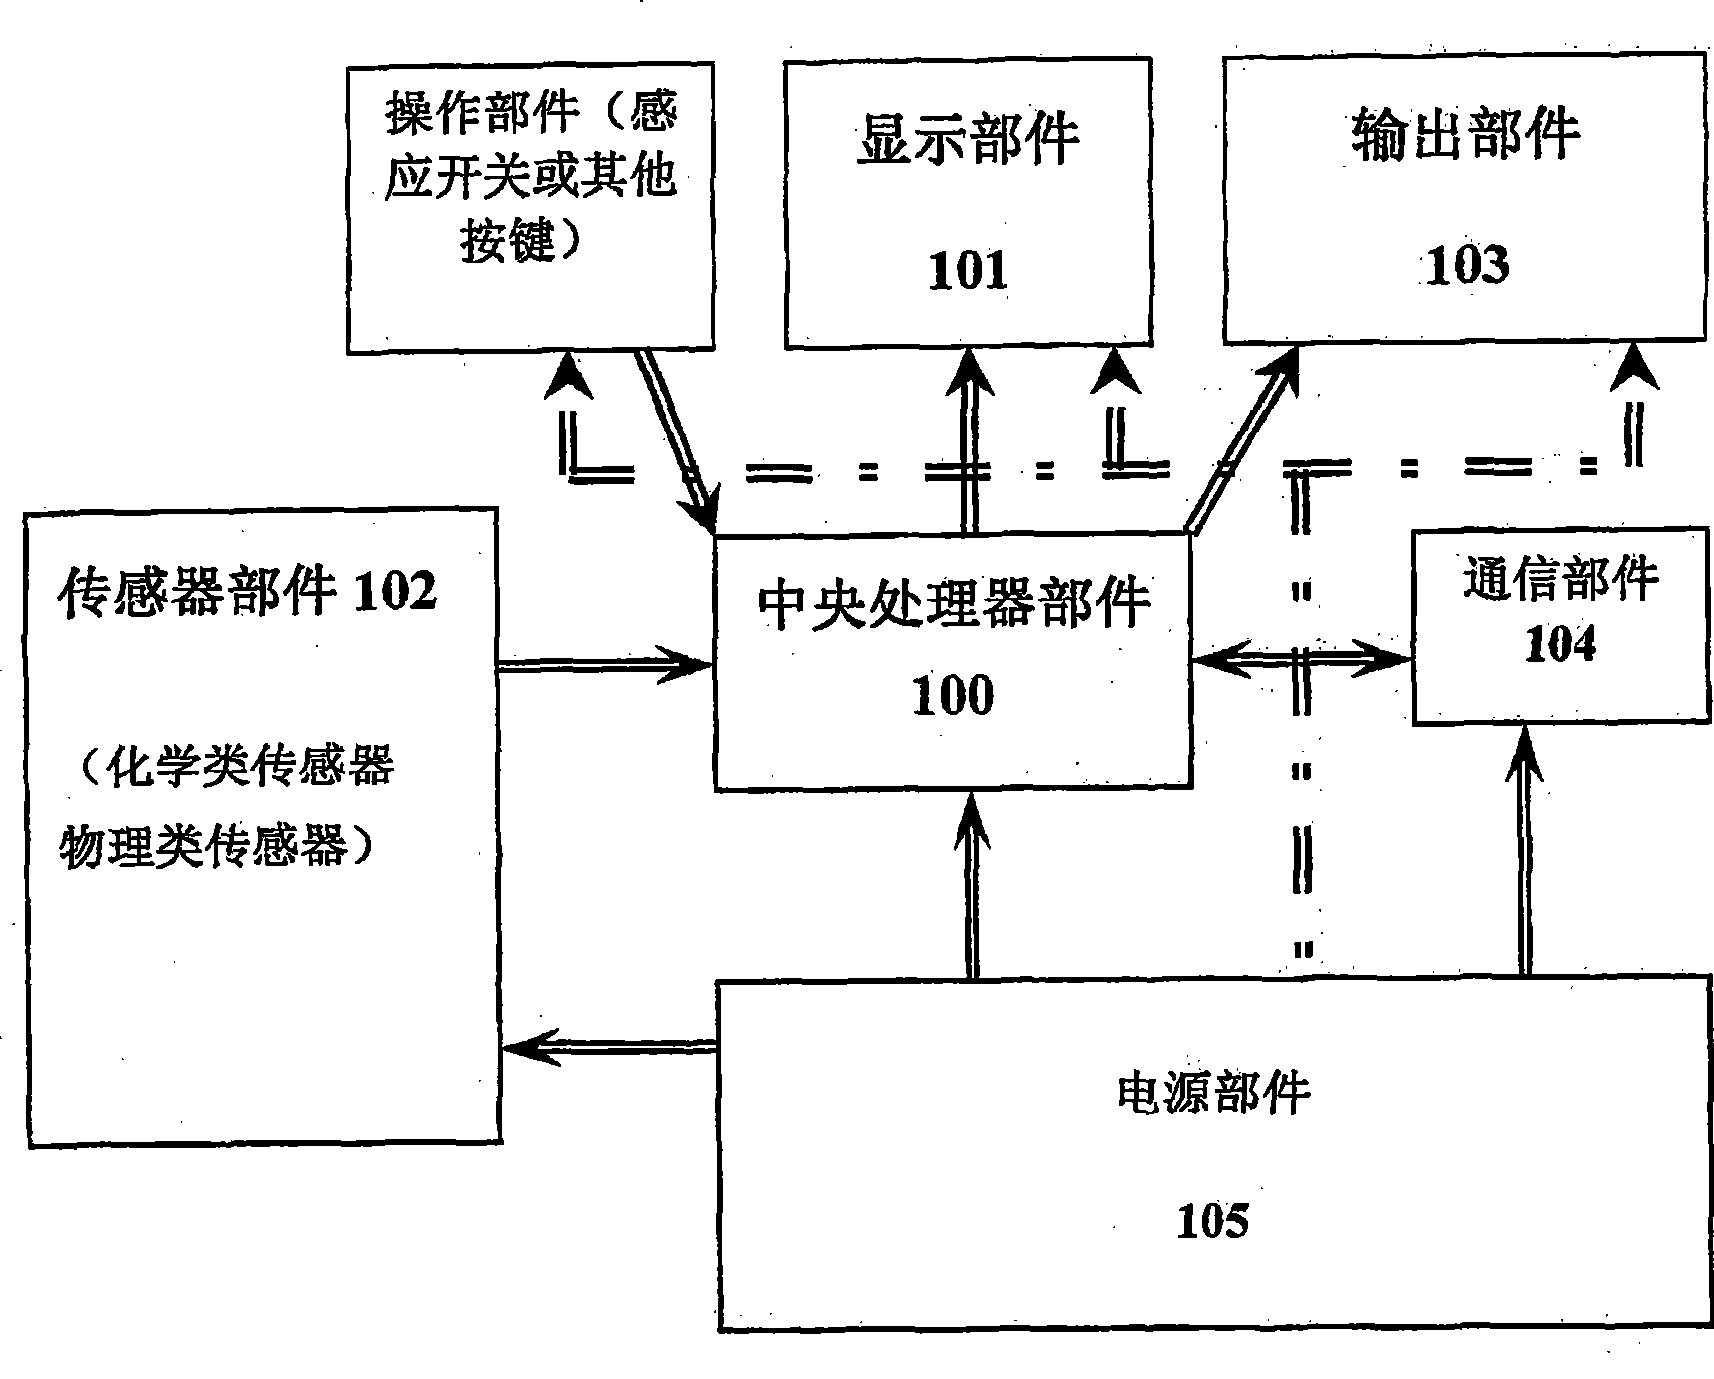 Multifunctional air environment monitoring control device